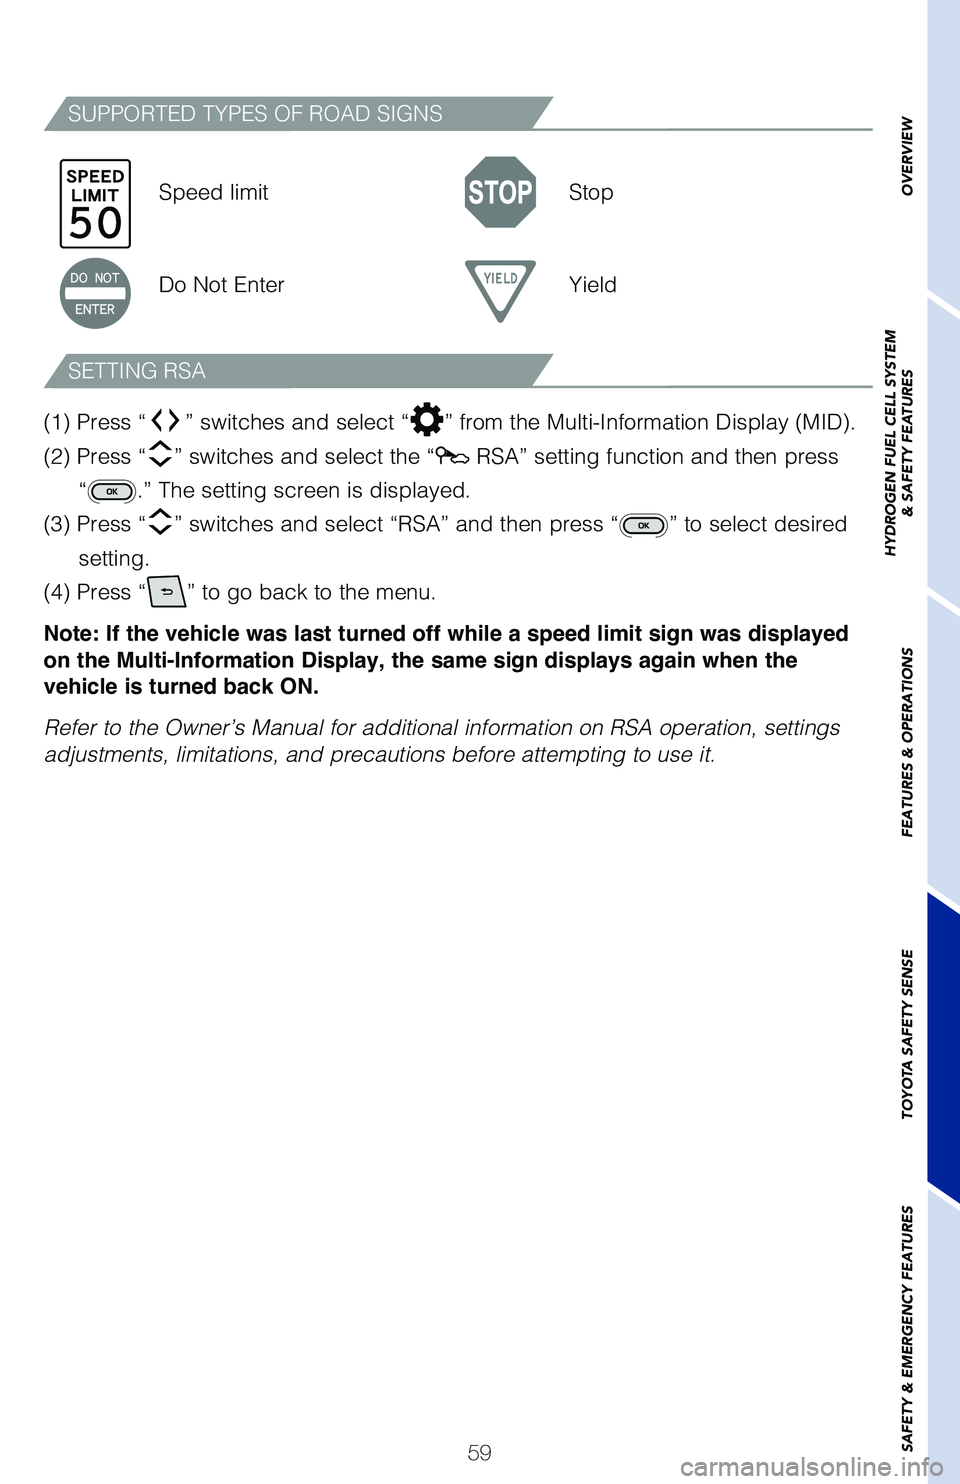 TOYOTA MIRAI 2021   (in English) Owners Guide 59
SUPPORTED TYPES OF ROAD SIGNS
SETTING RSA
Speed limitStop
Do Not Enter Yield
(1) Press “
” switches and select “” from the Multi-Information Display (MID).  
(2) Press “
” switches and 